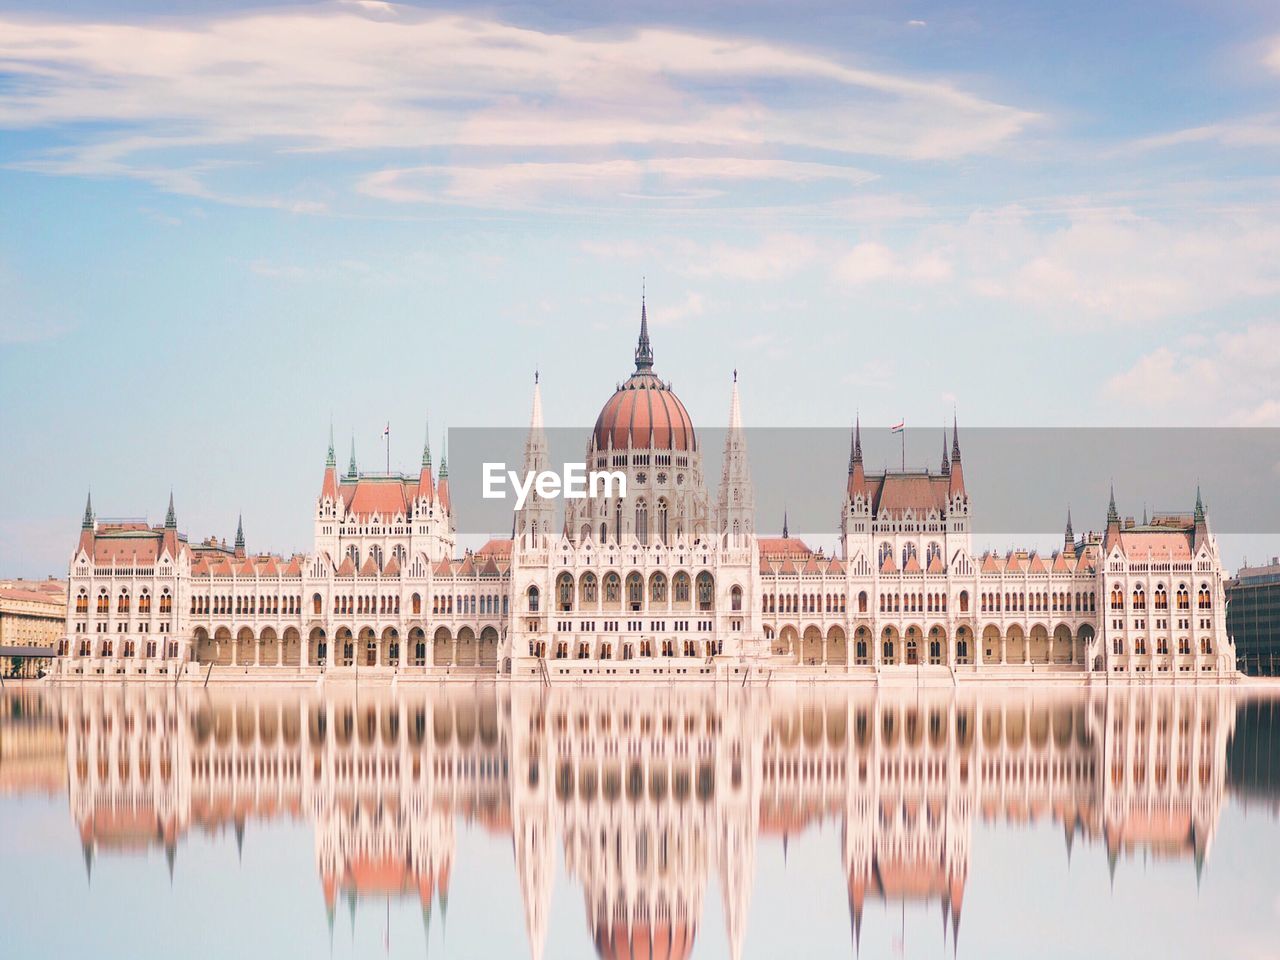 Reflection of hungarian parliament building in river against sky